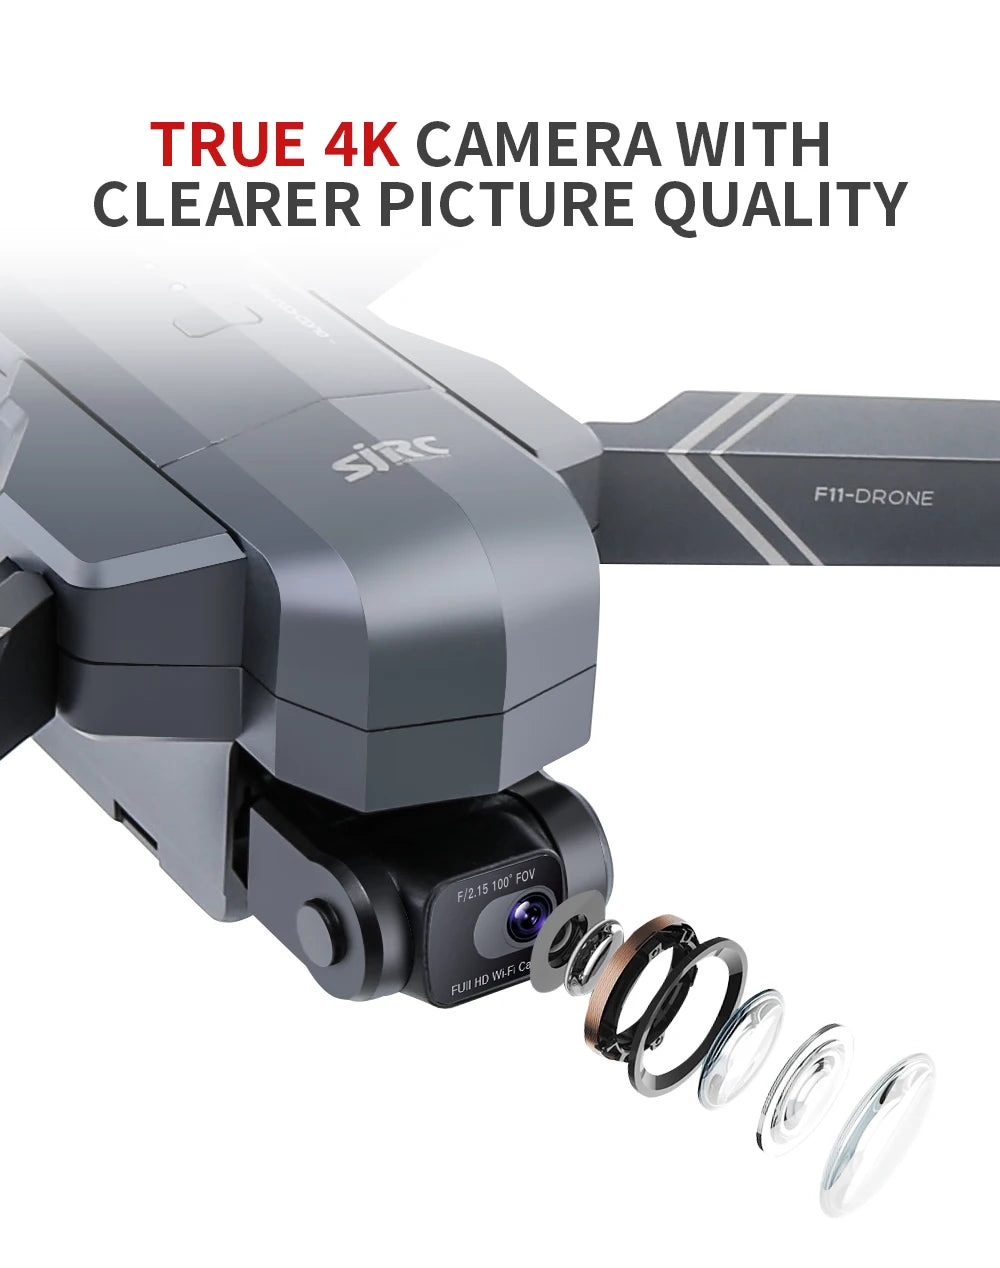 SJRC F11 / F11S  Pro Drone, TRUE 4K CAMERA WITH CLEARER PICTURE QUALITY F